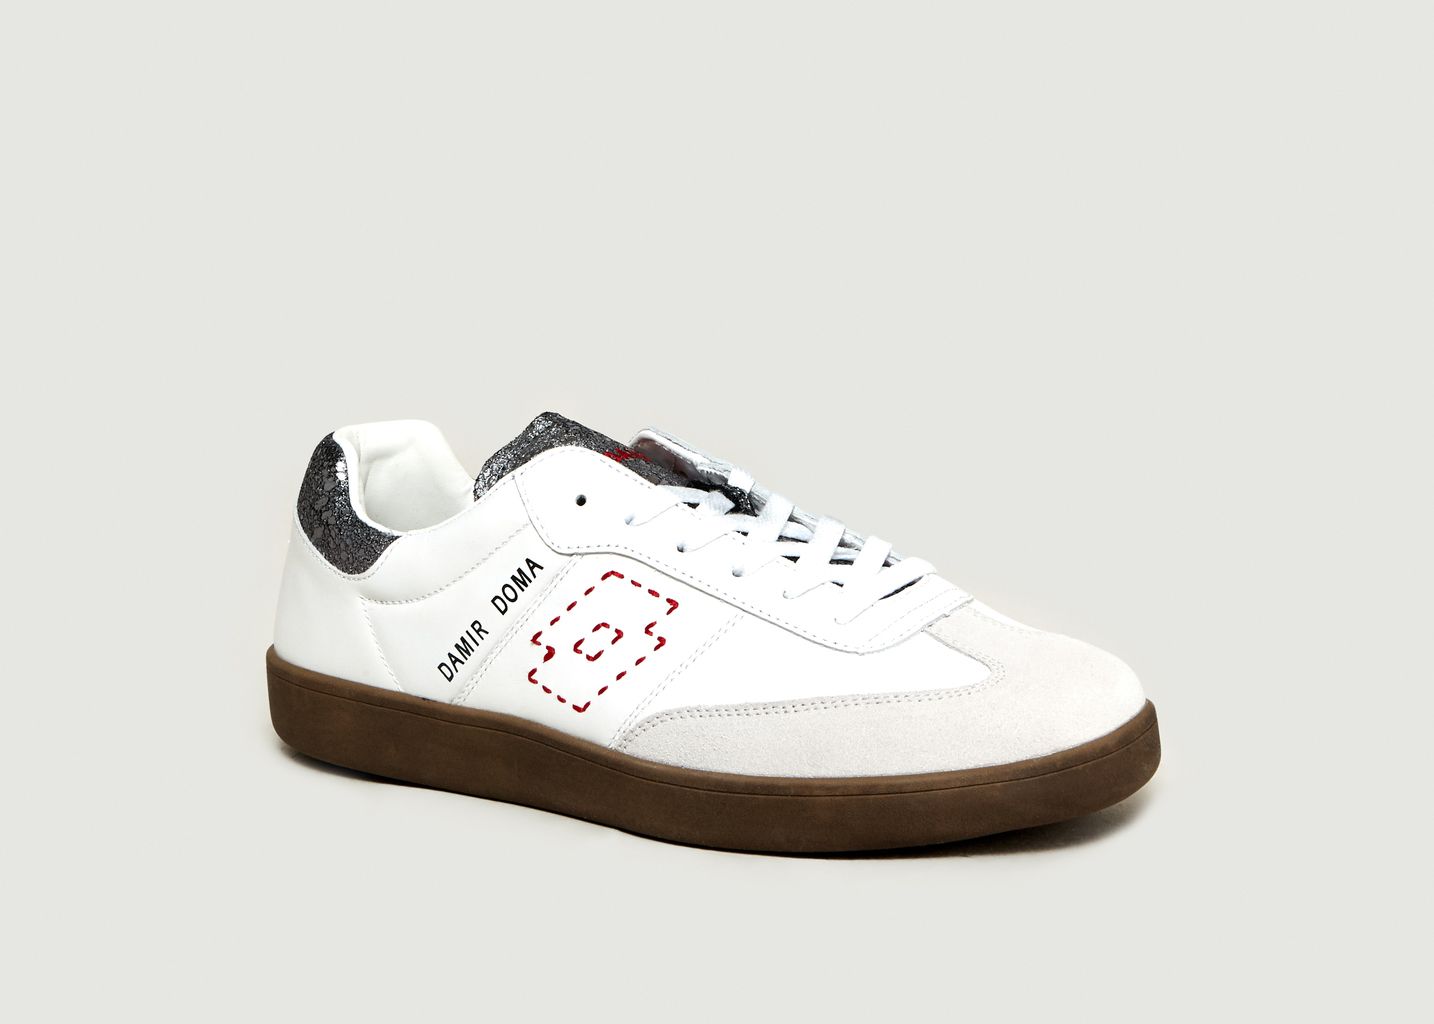 Brazil Select DD Trainers - Damir Doma x Lotto